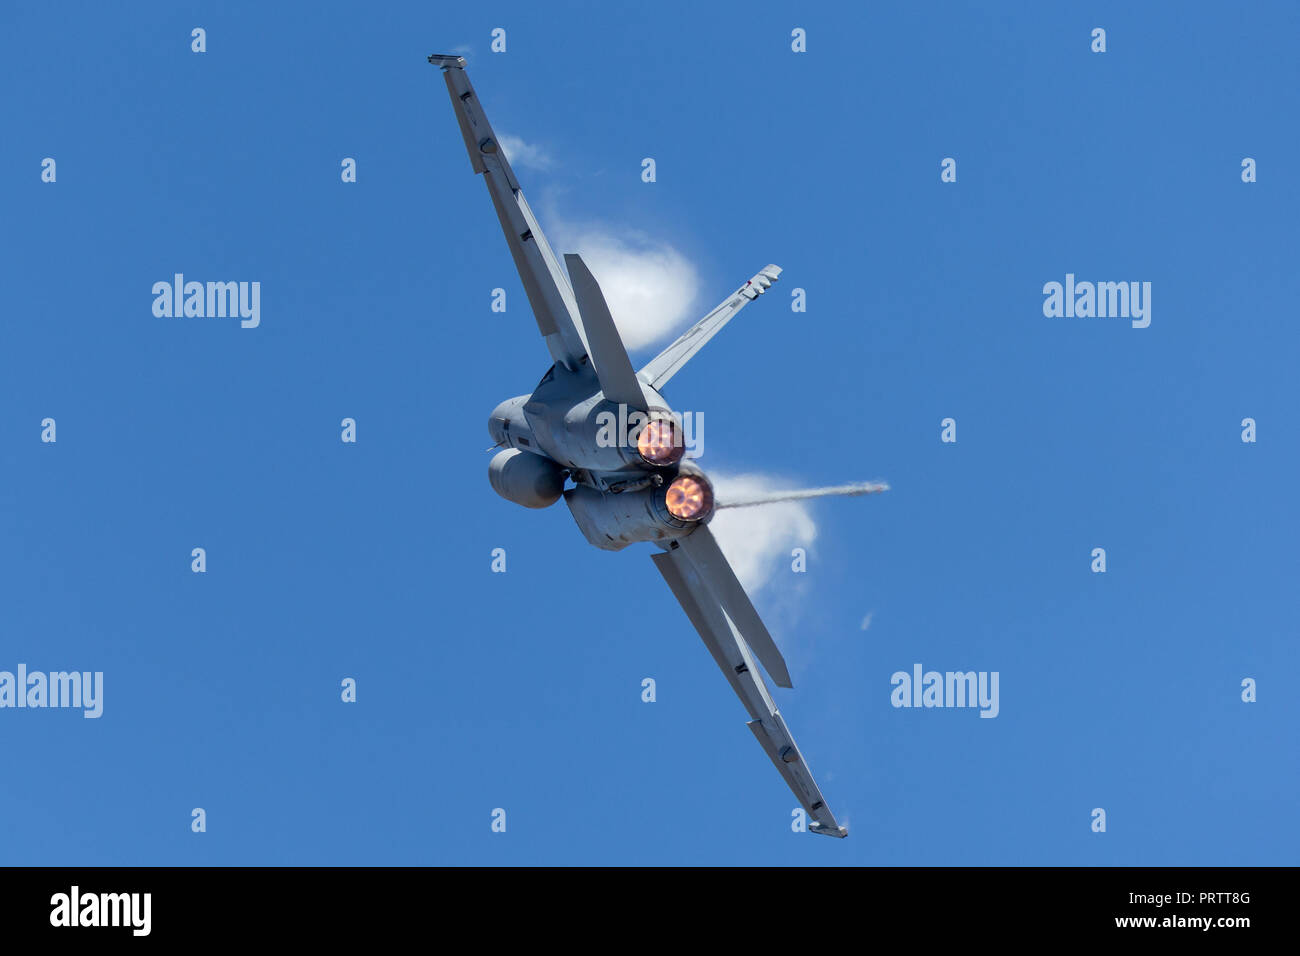 Royal Australian Air Force (RAAF) Boeing F/A-18F Super Hornet multirole fighter aircraft A44-222 based at RAAF Amberley in Queensland. Stock Photo